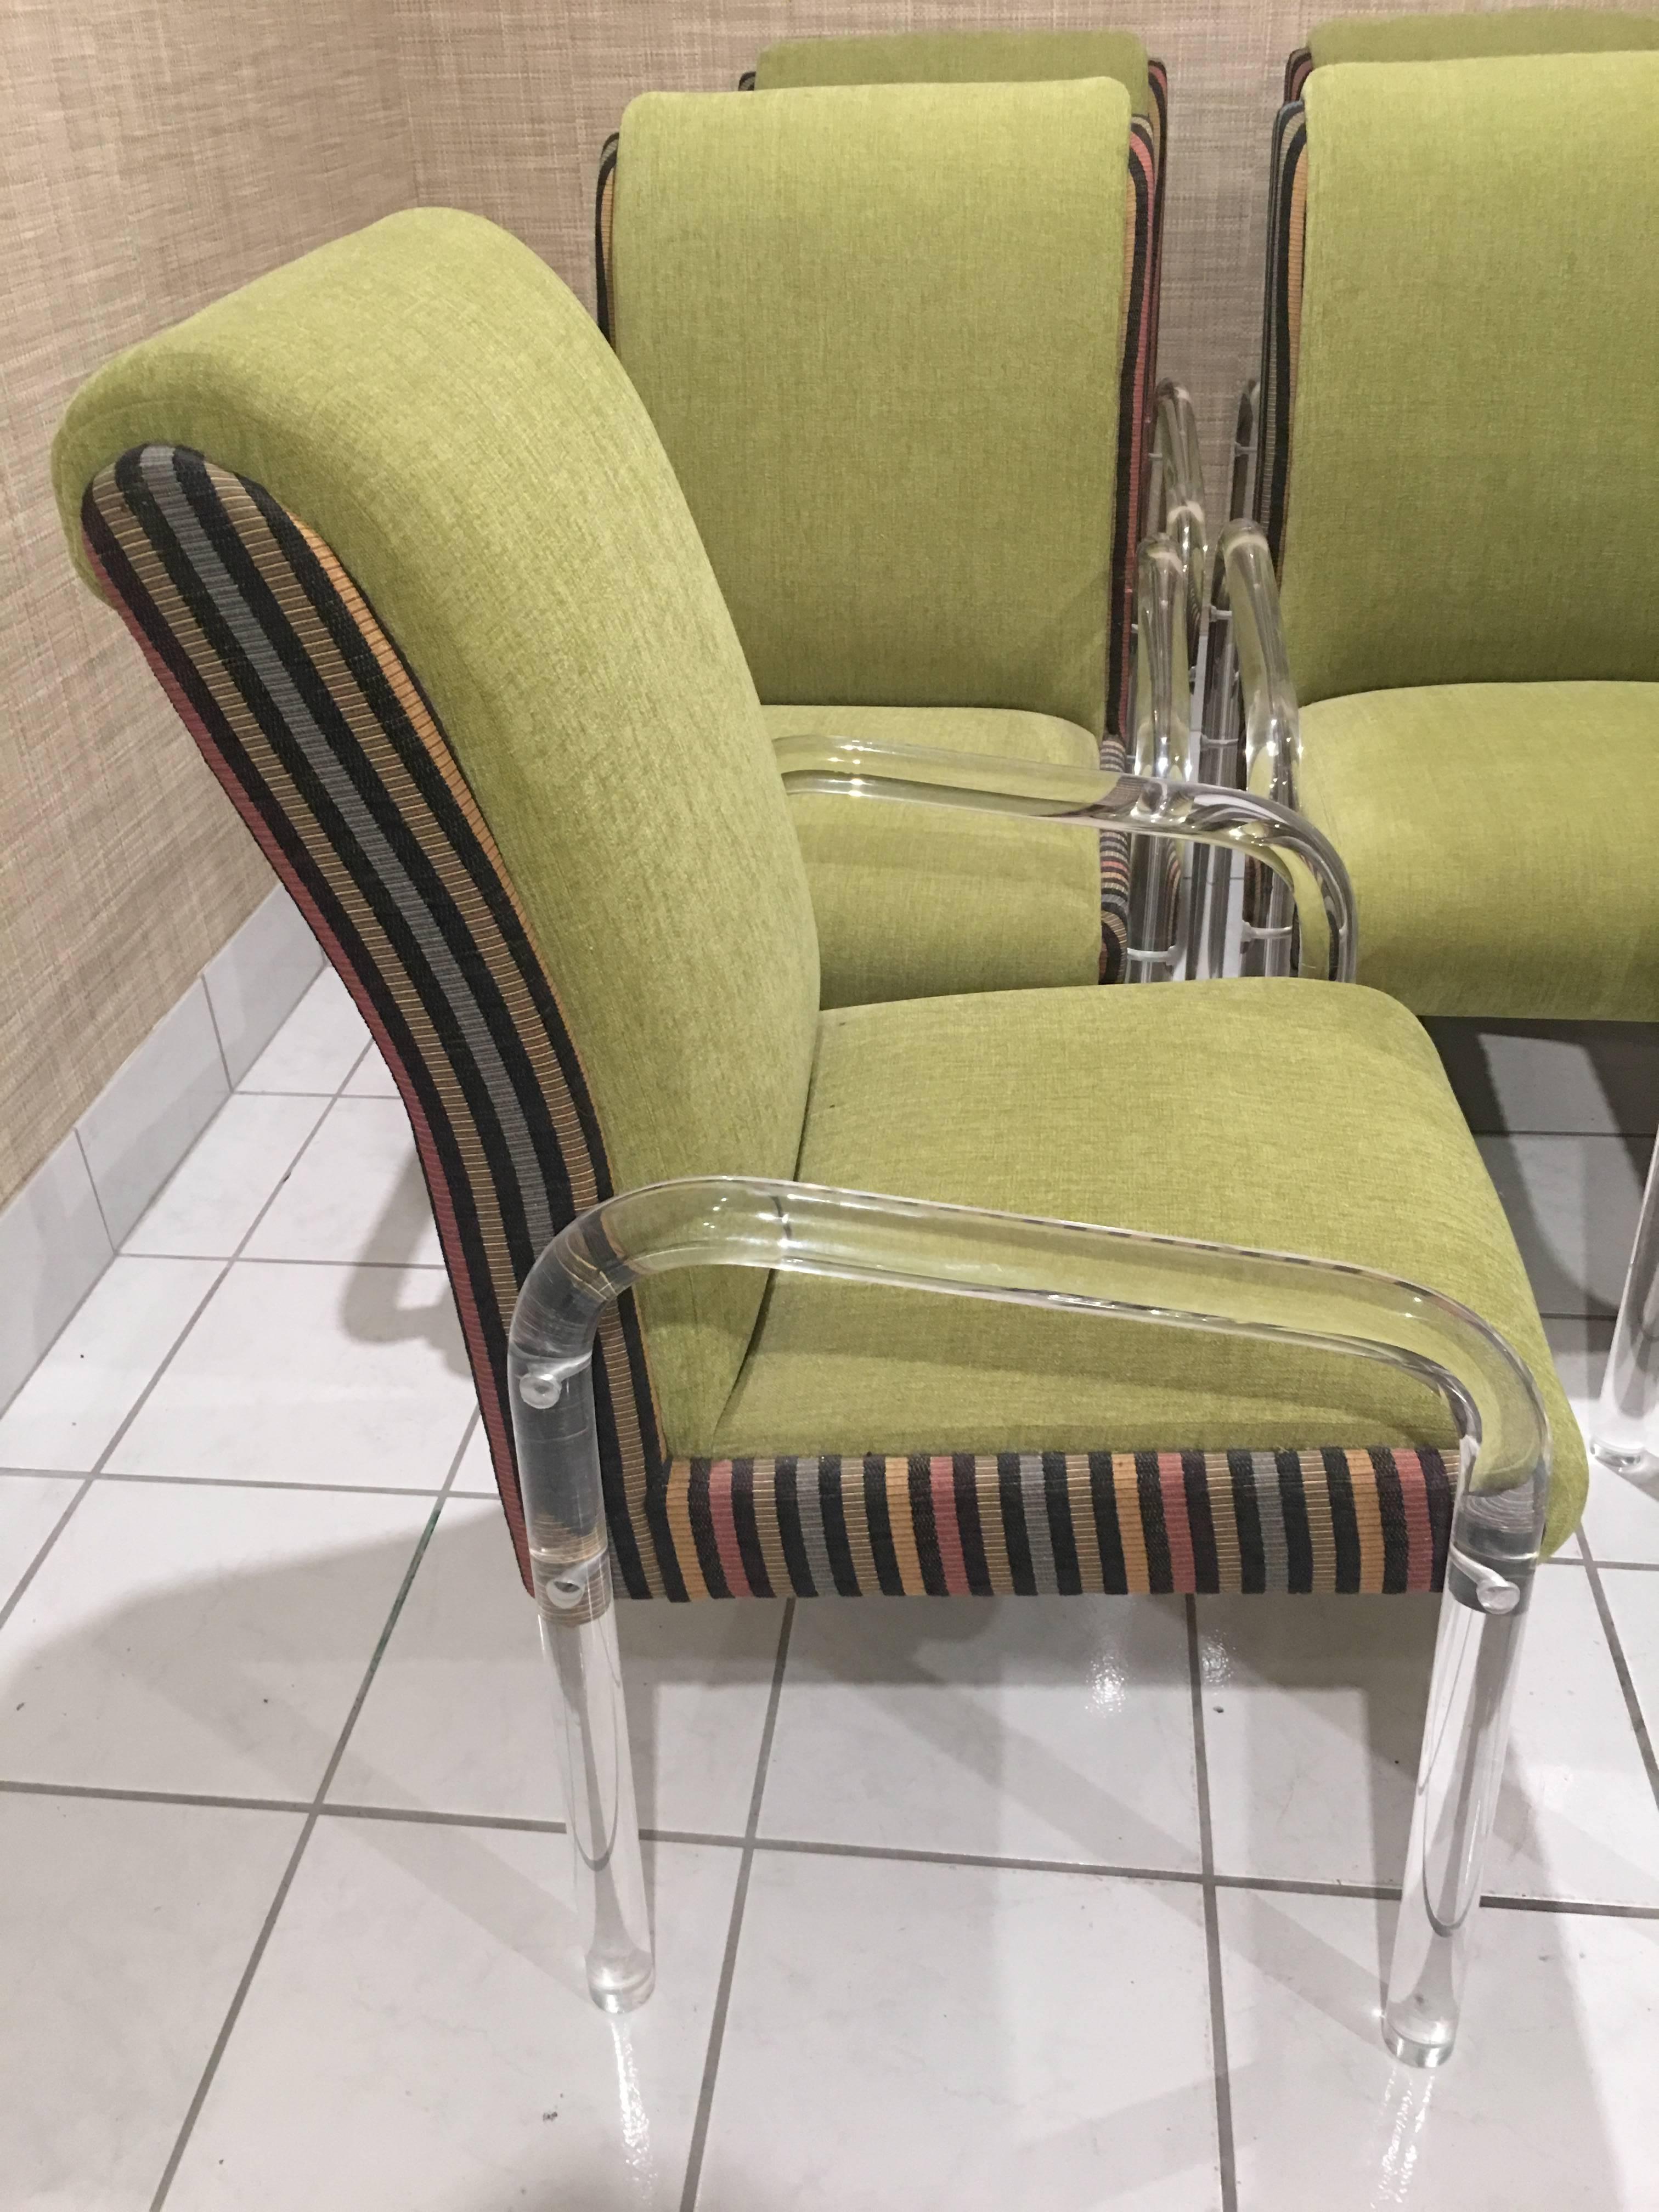 Set of Eight vintage Lucite arm dining chairs by Leon Pace.
These have there original upholstery which may have some slight stains. No defects to the Lucite.